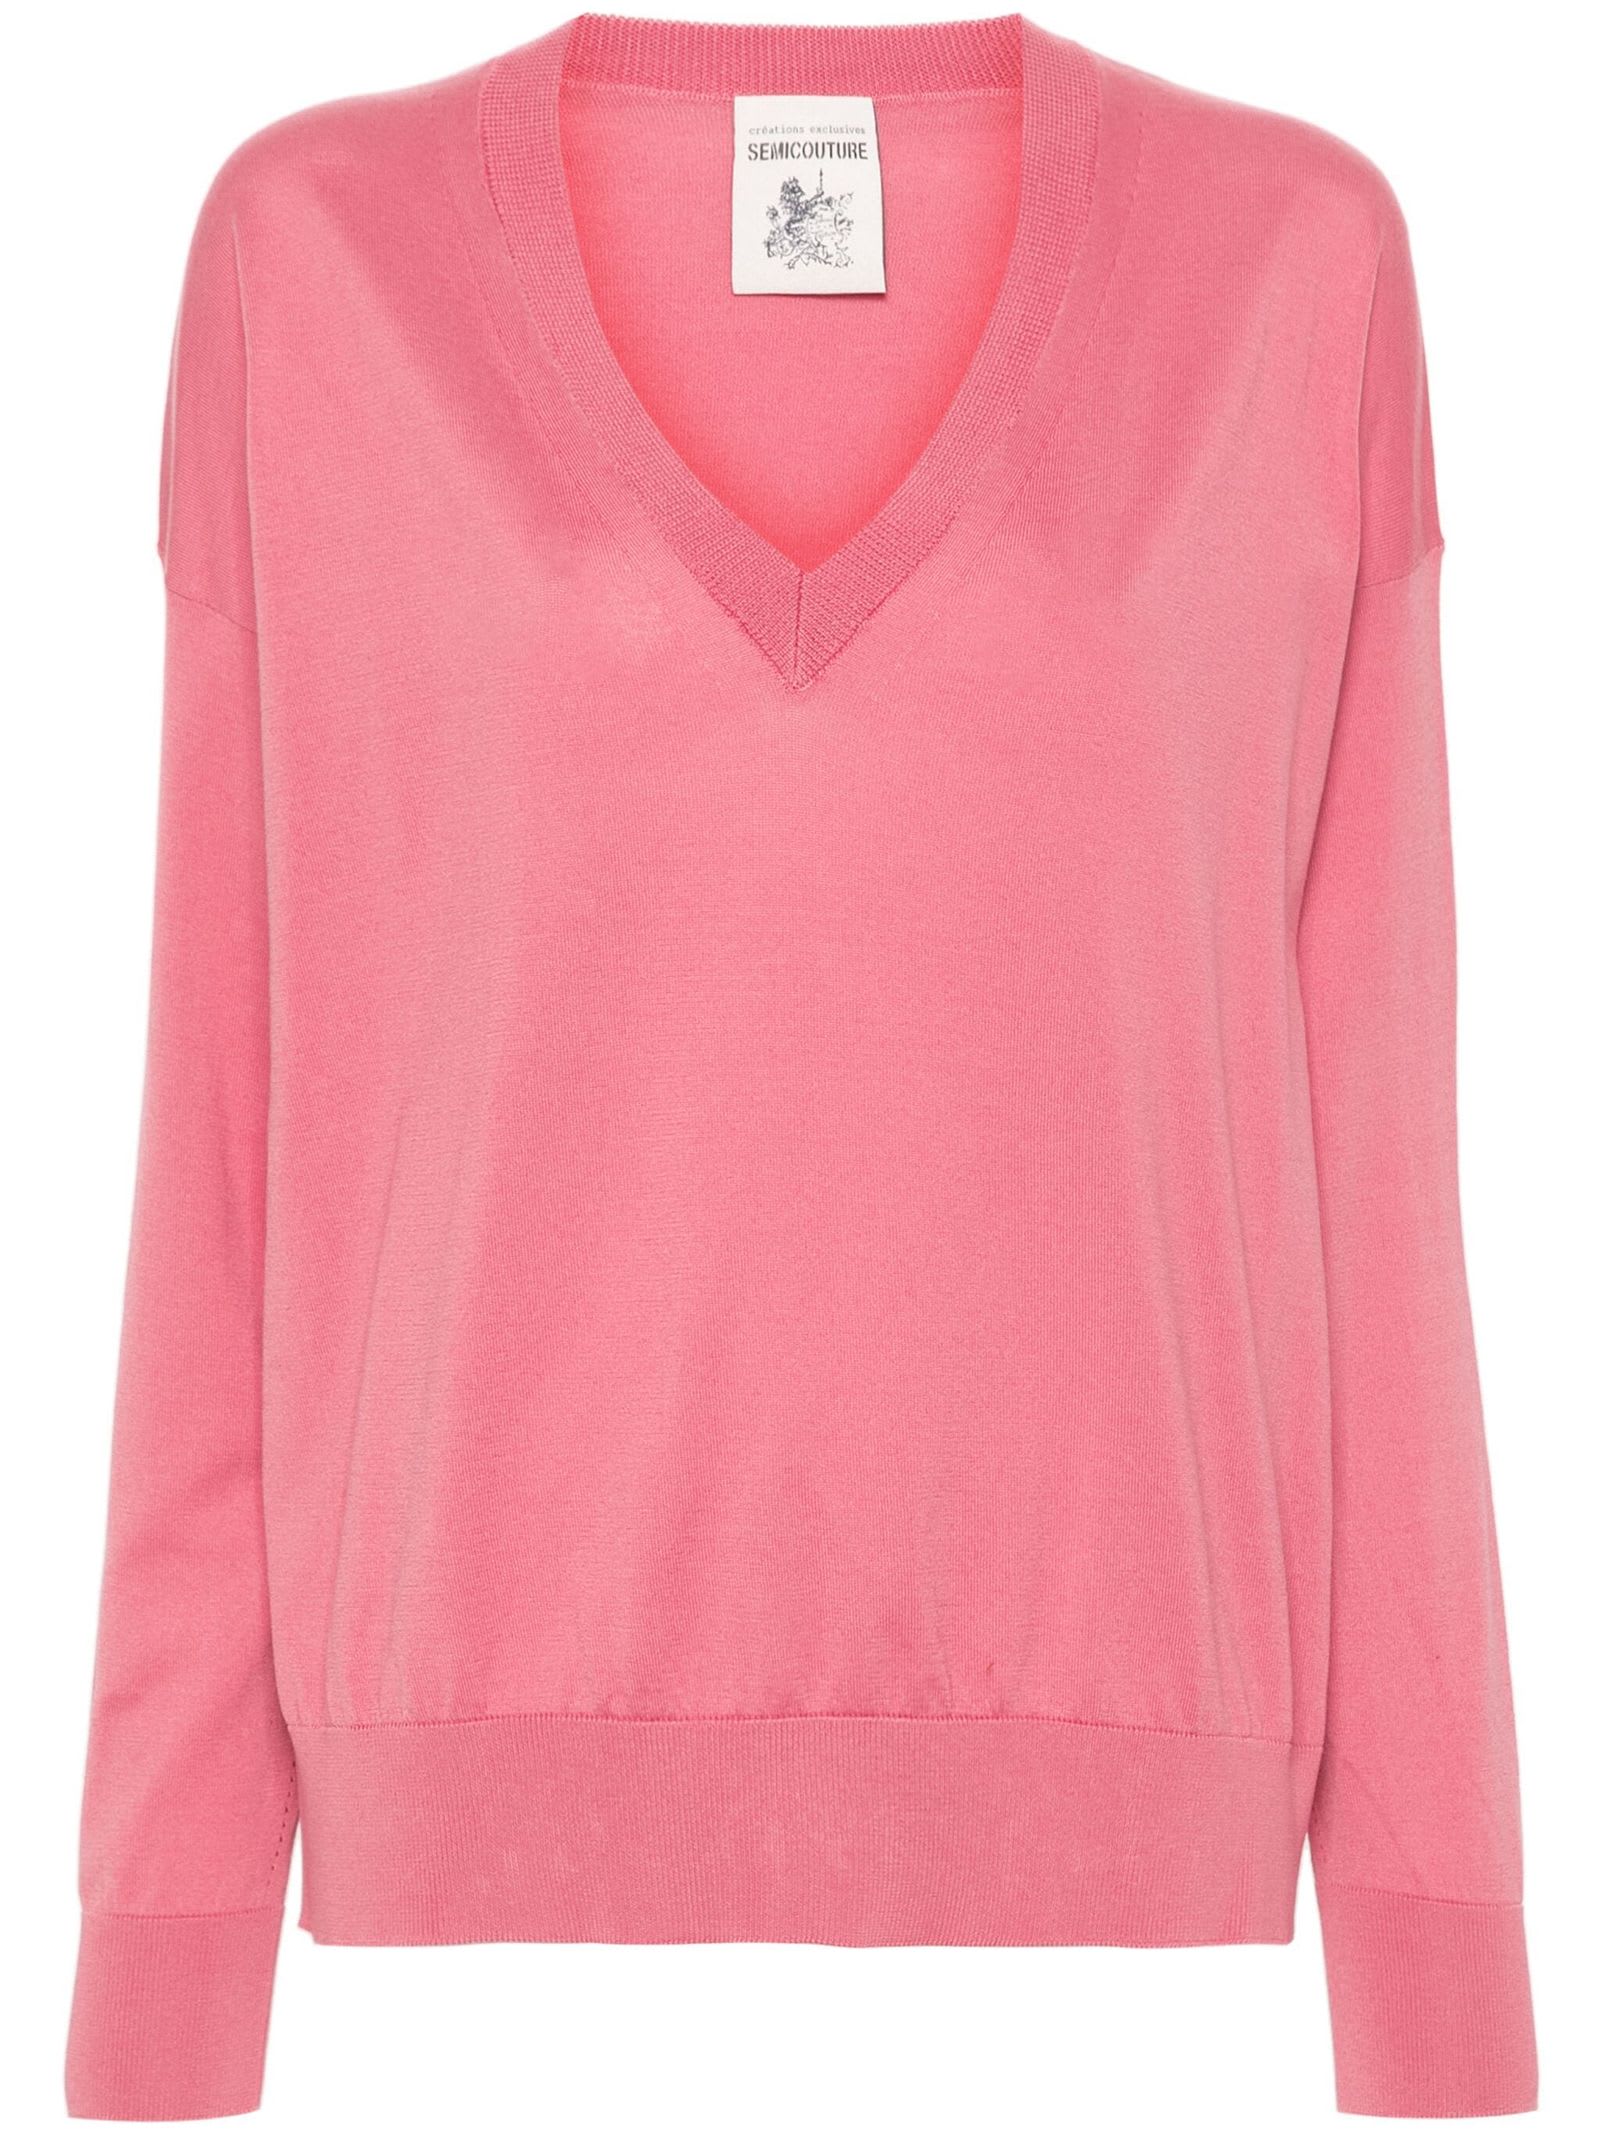 Shop Semicouture Pink Cotton Sweater